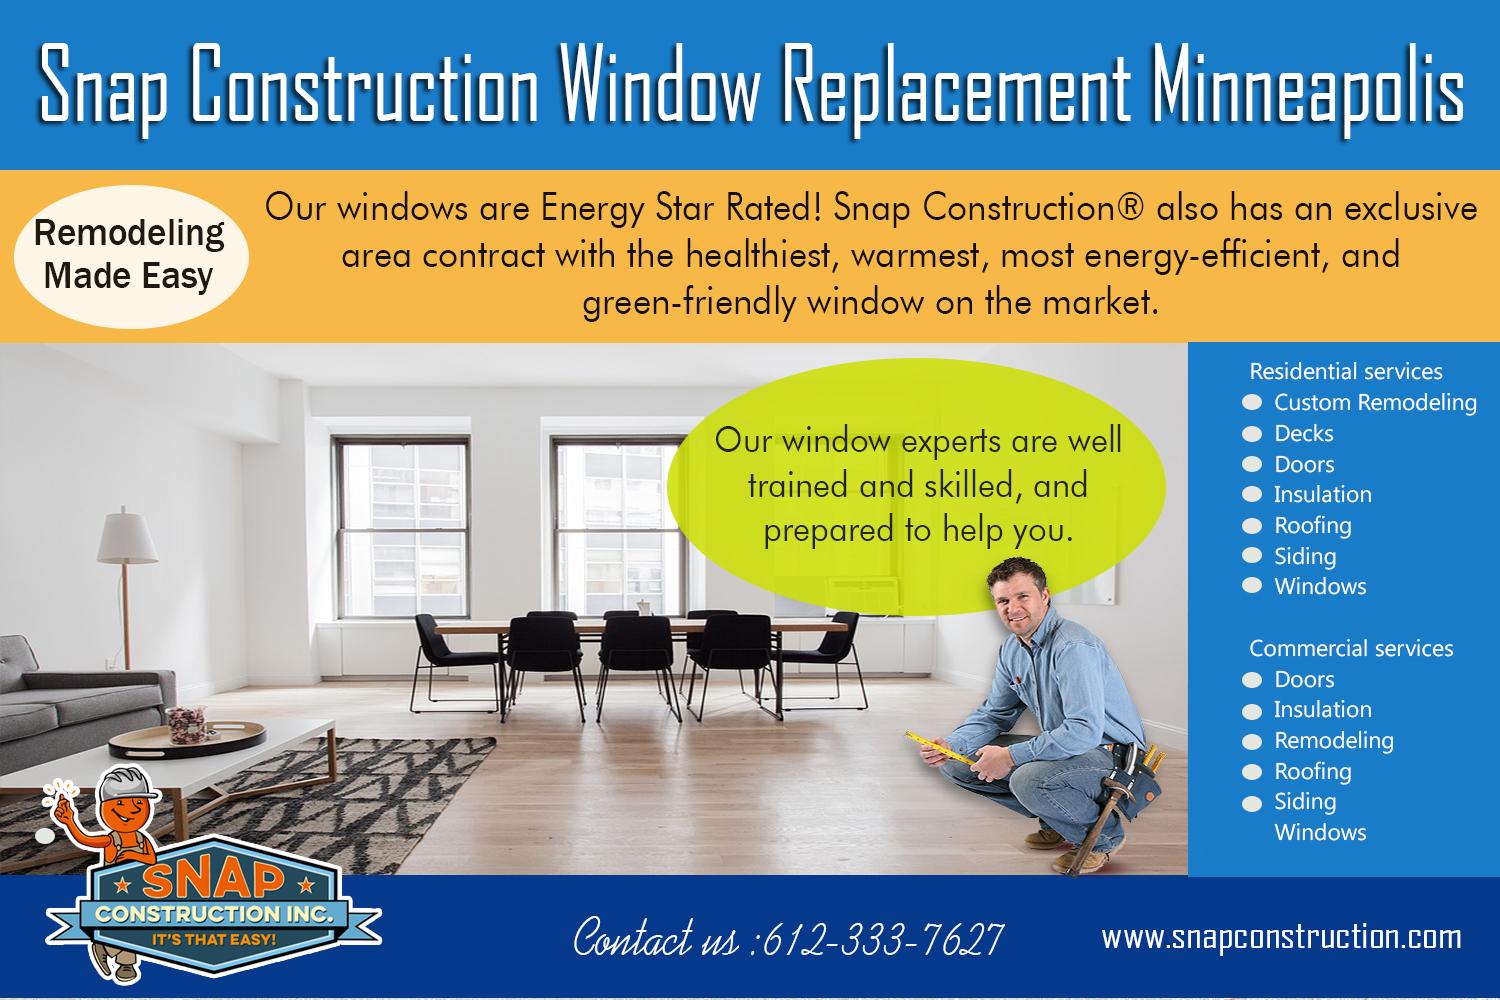 Snap Construction replacement windows mn